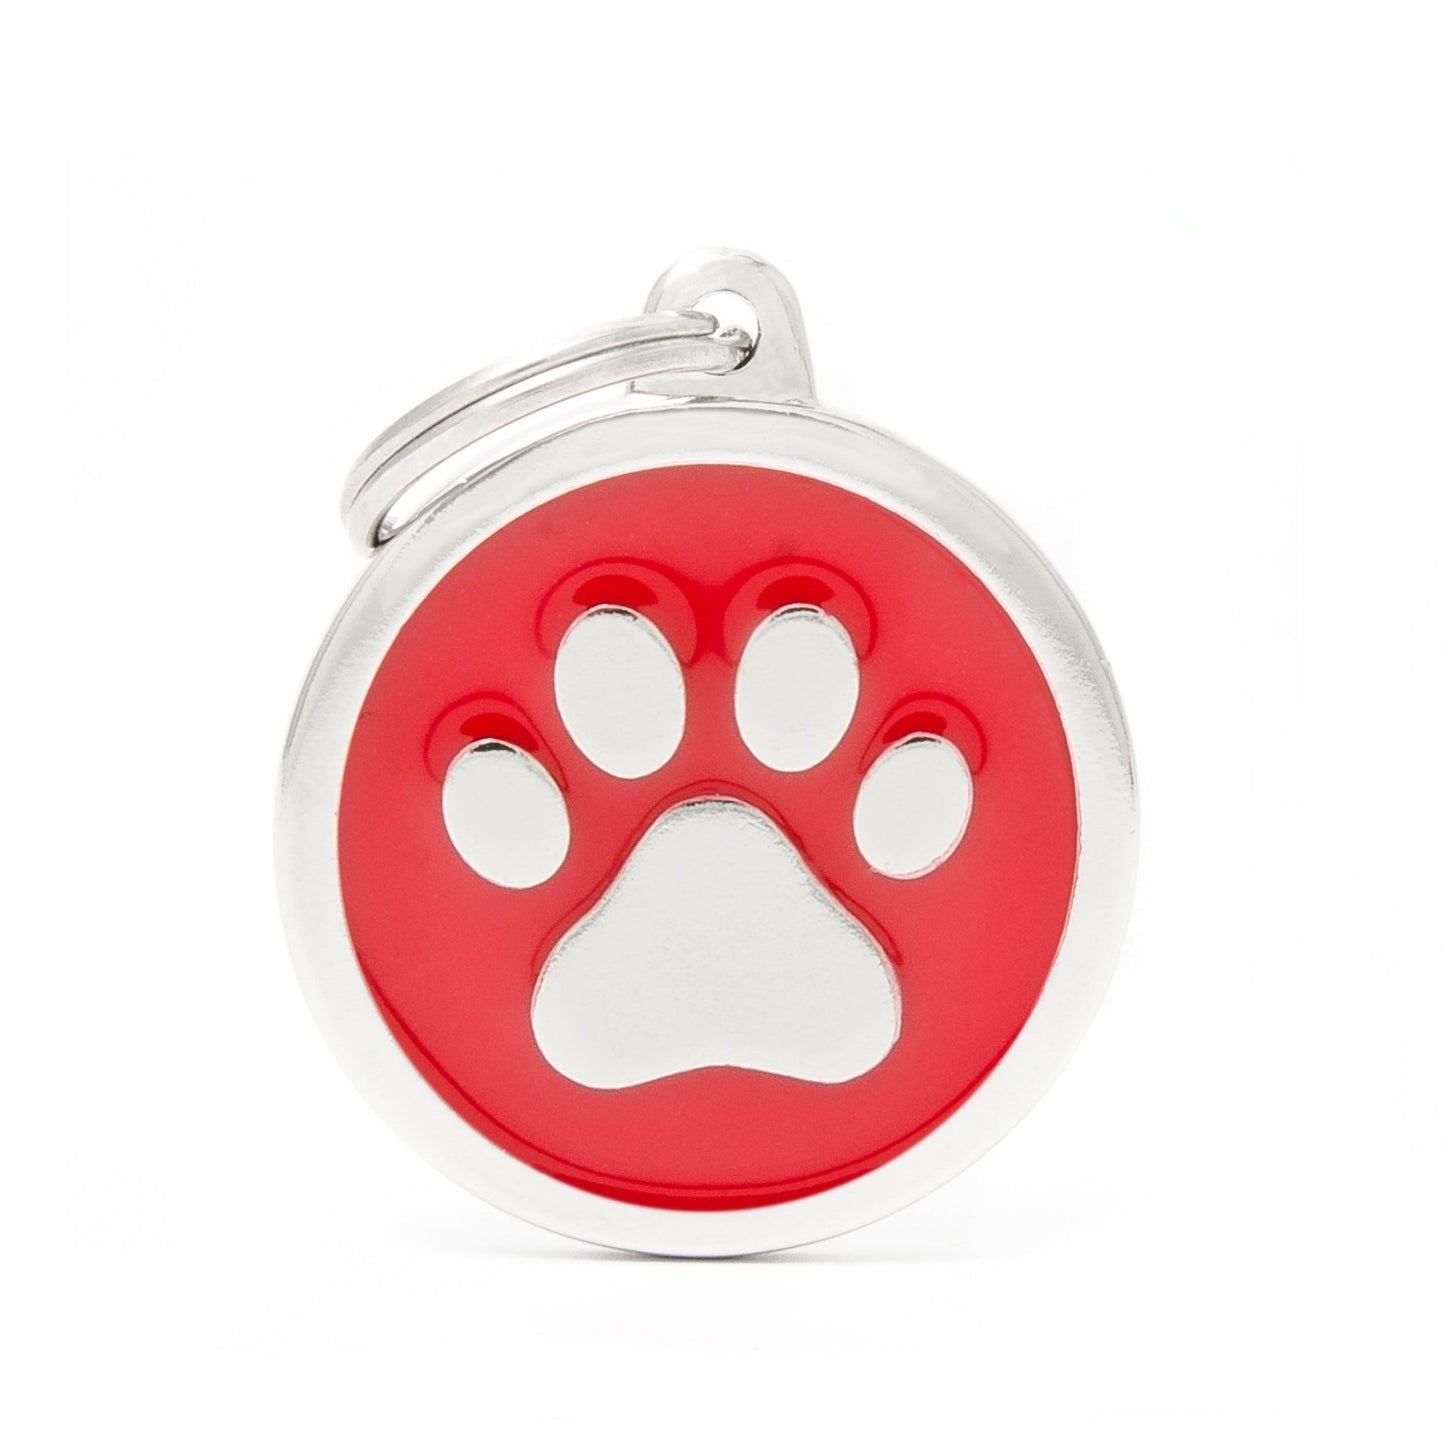 My Friends Pet Tag Classic Paw Large Red - Woonona Petfood & Produce